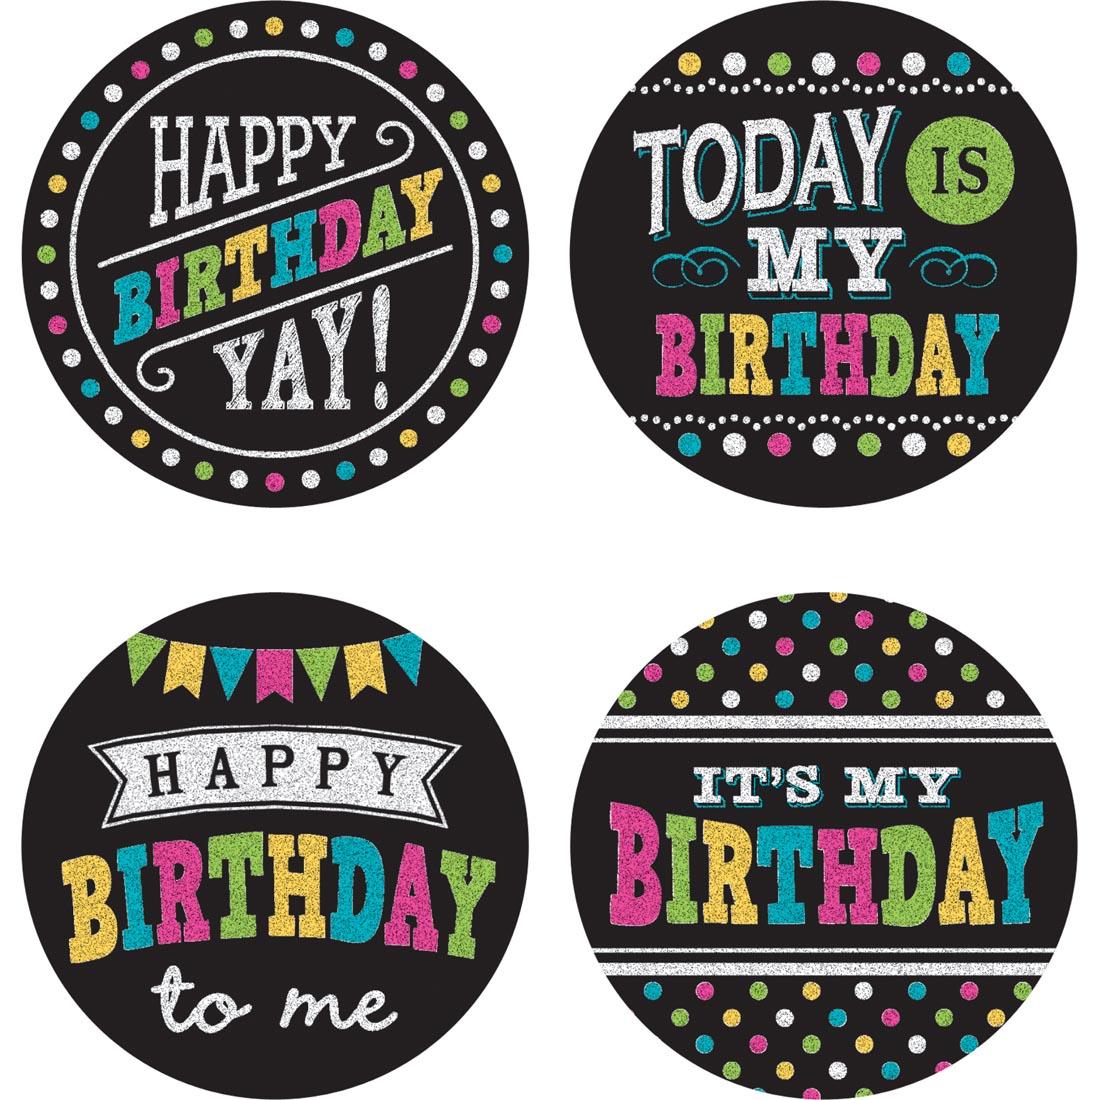 Happy Birthday Wear 'Em Badges from the Chalkboard Brights collection by Teacher Created Resources